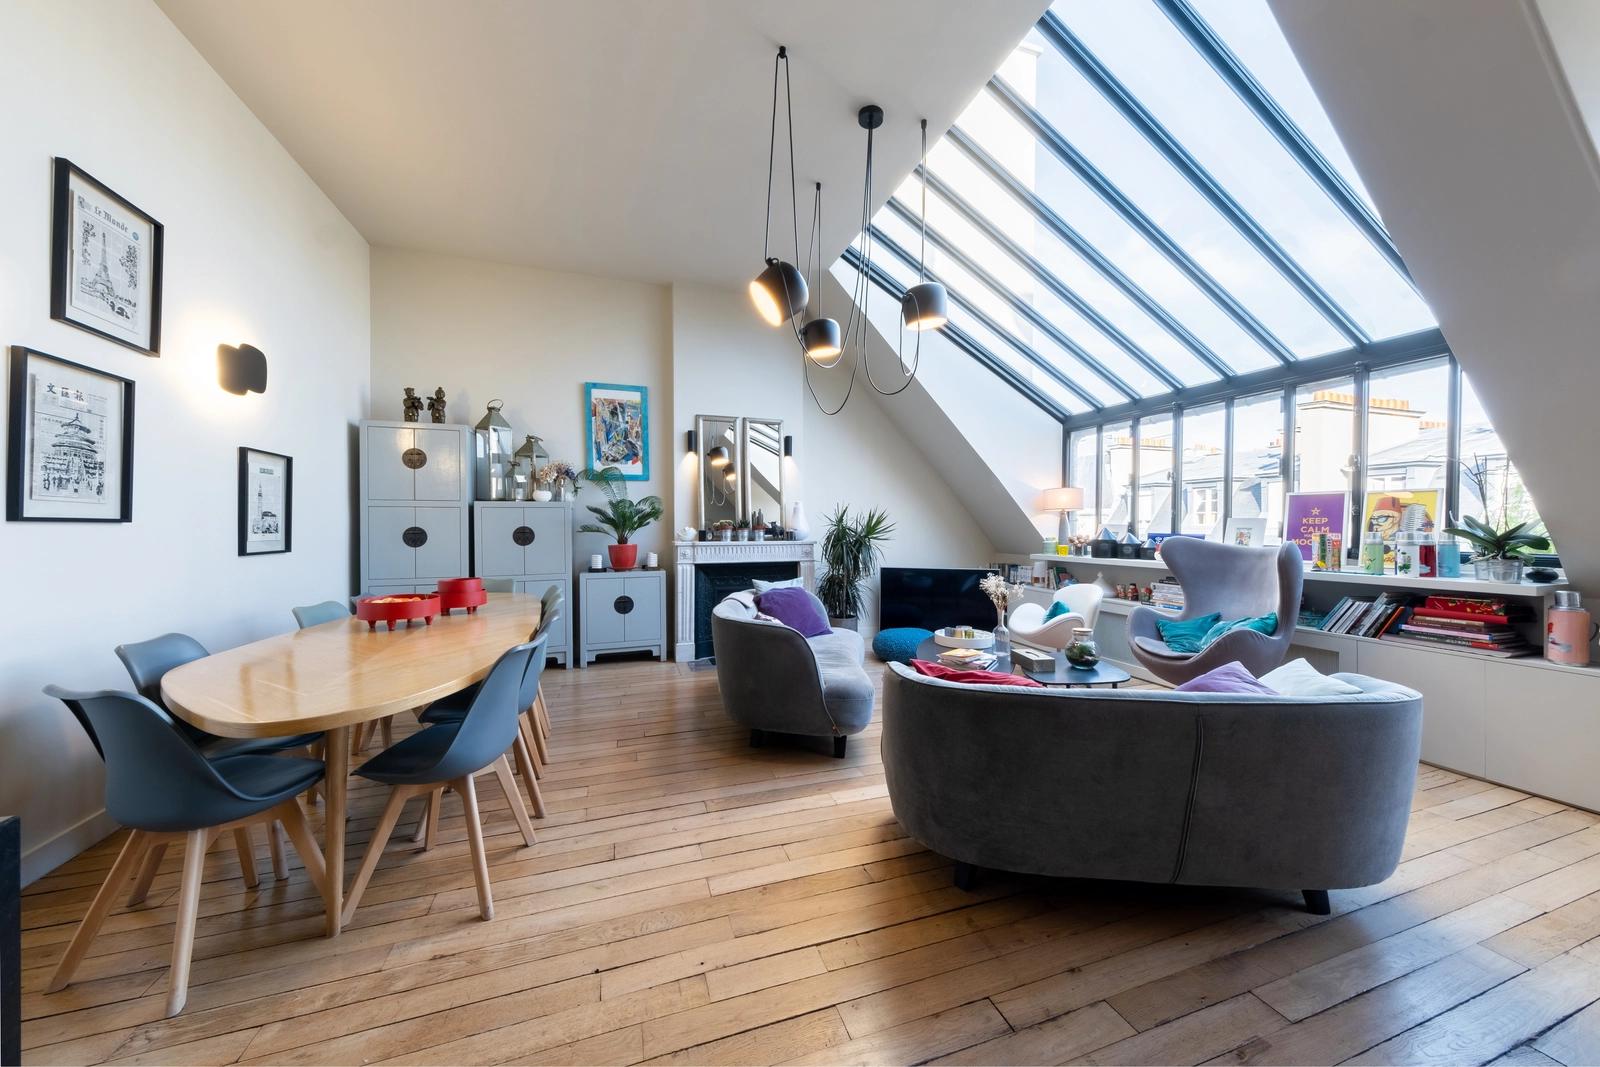 Duplex under glass roof with terrace